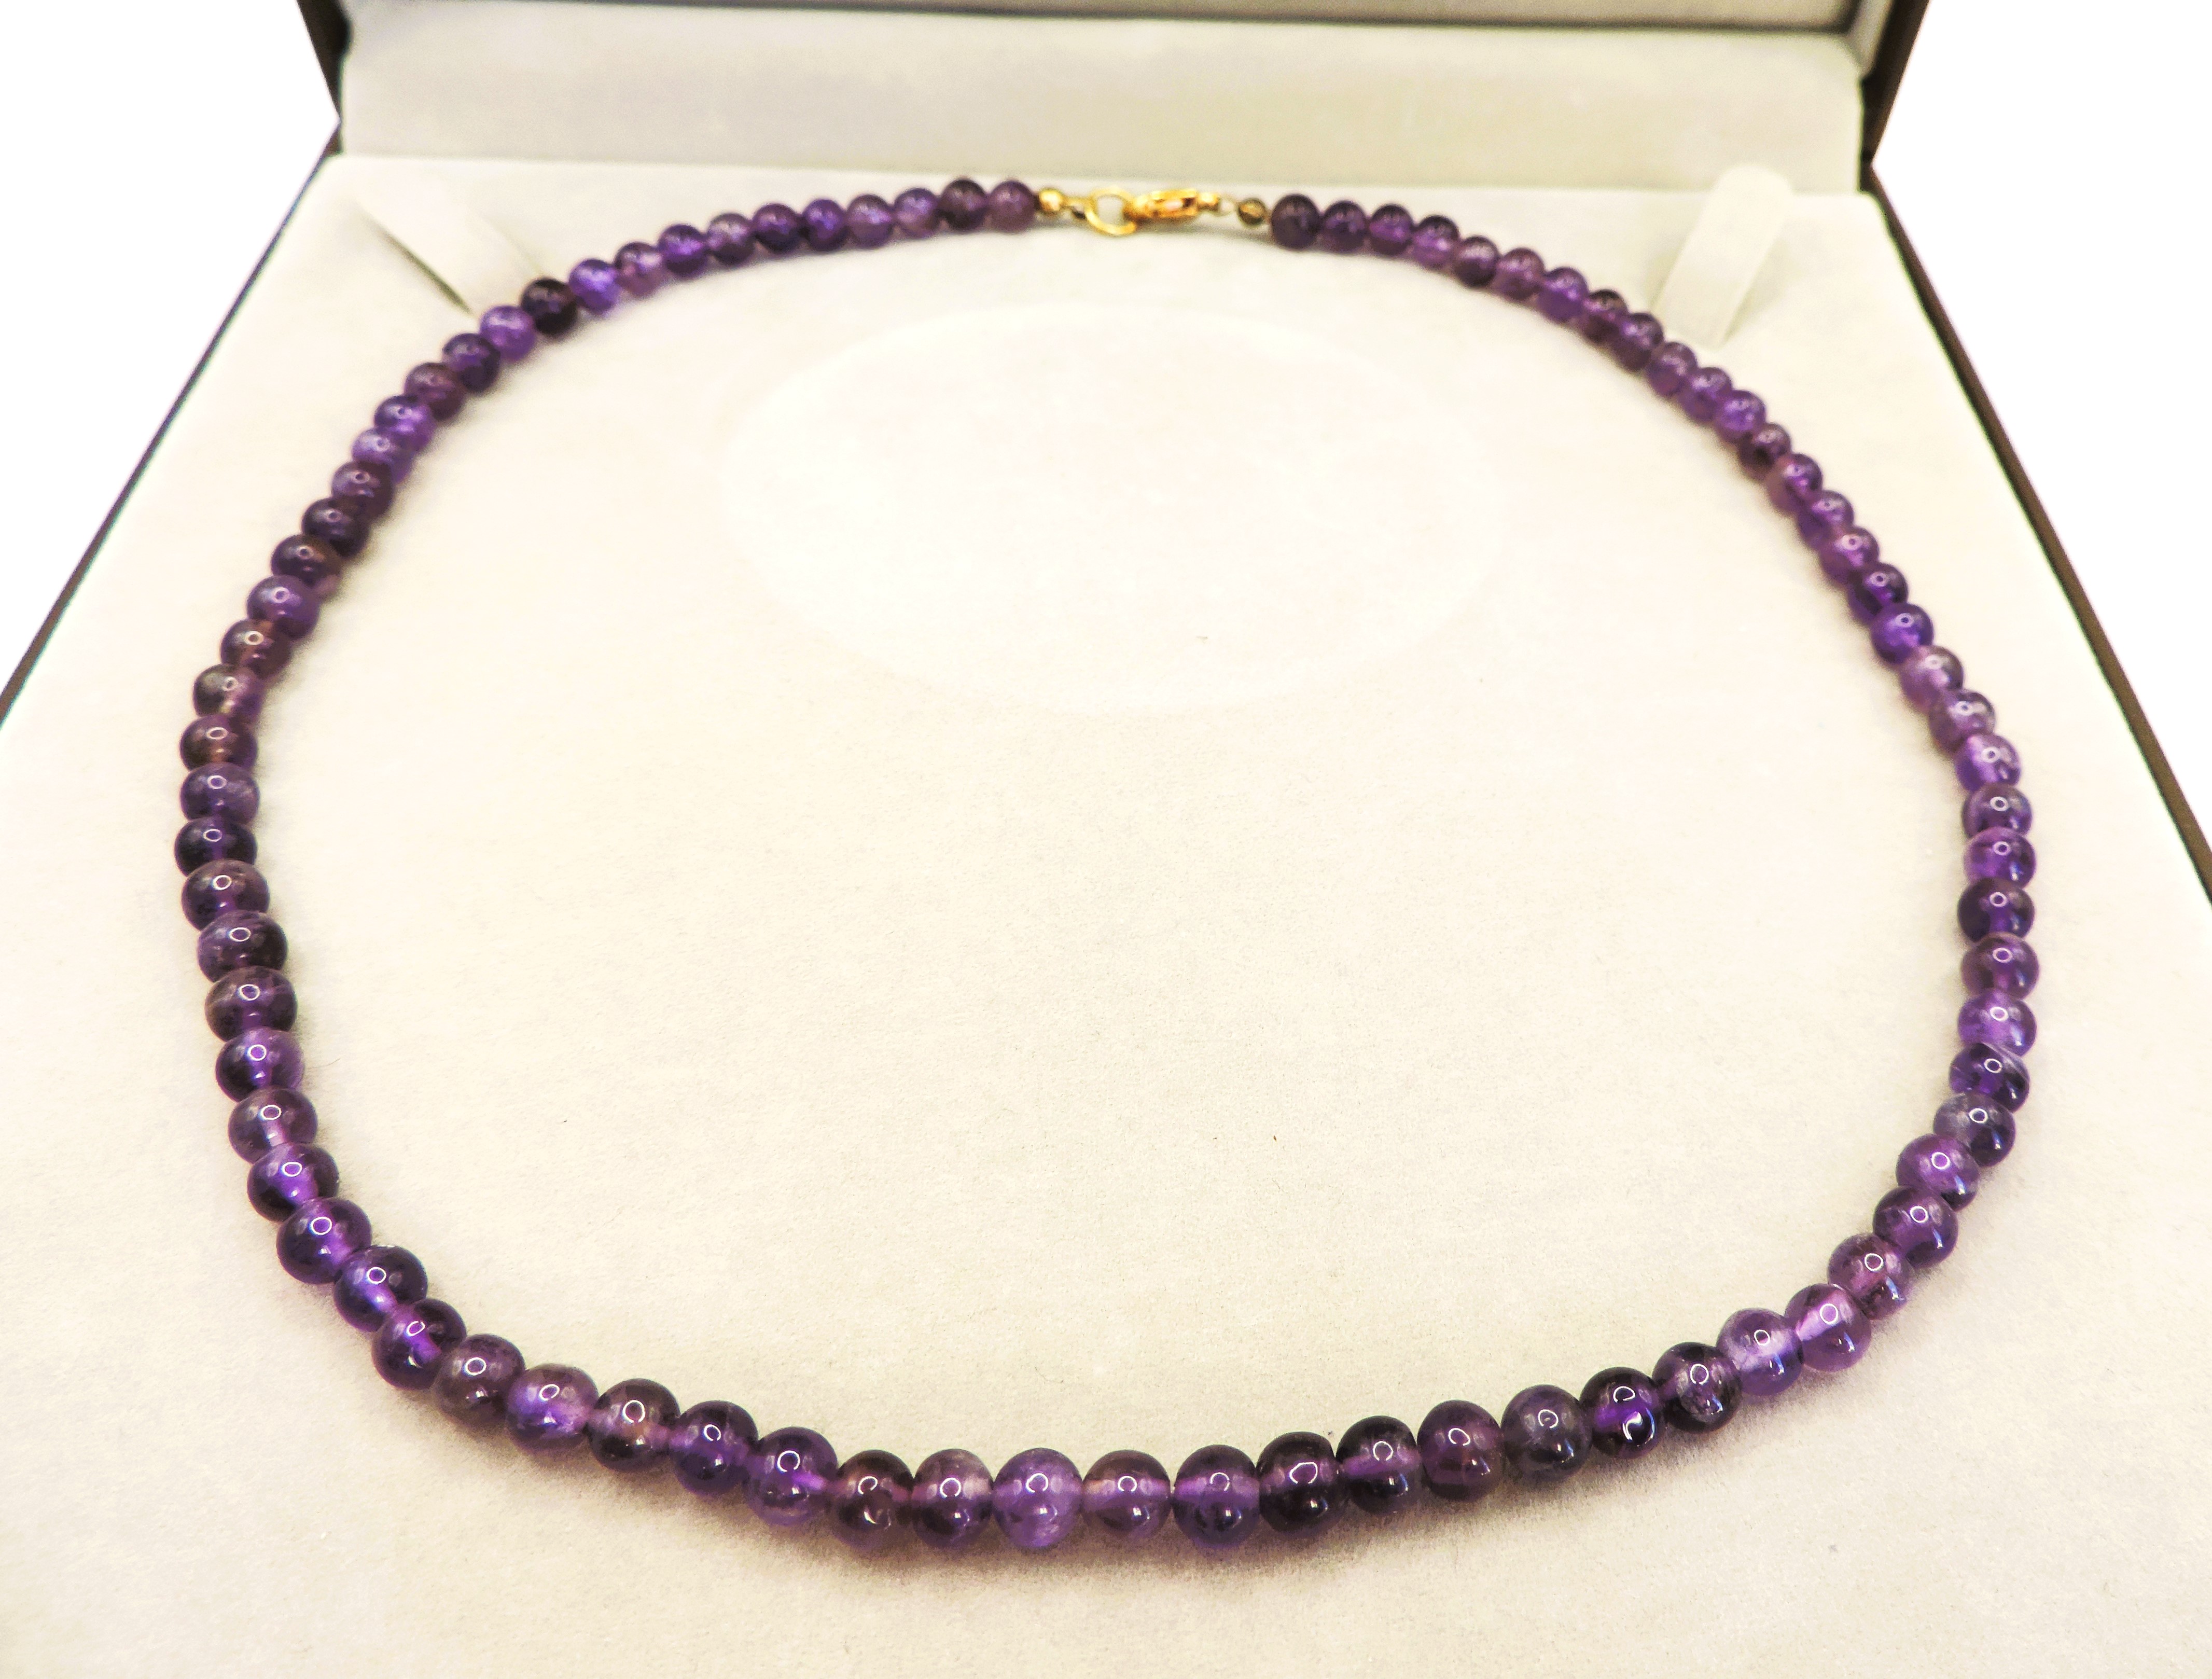 18 inch Amethyst Bead Necklace With Gift Box - Image 2 of 3